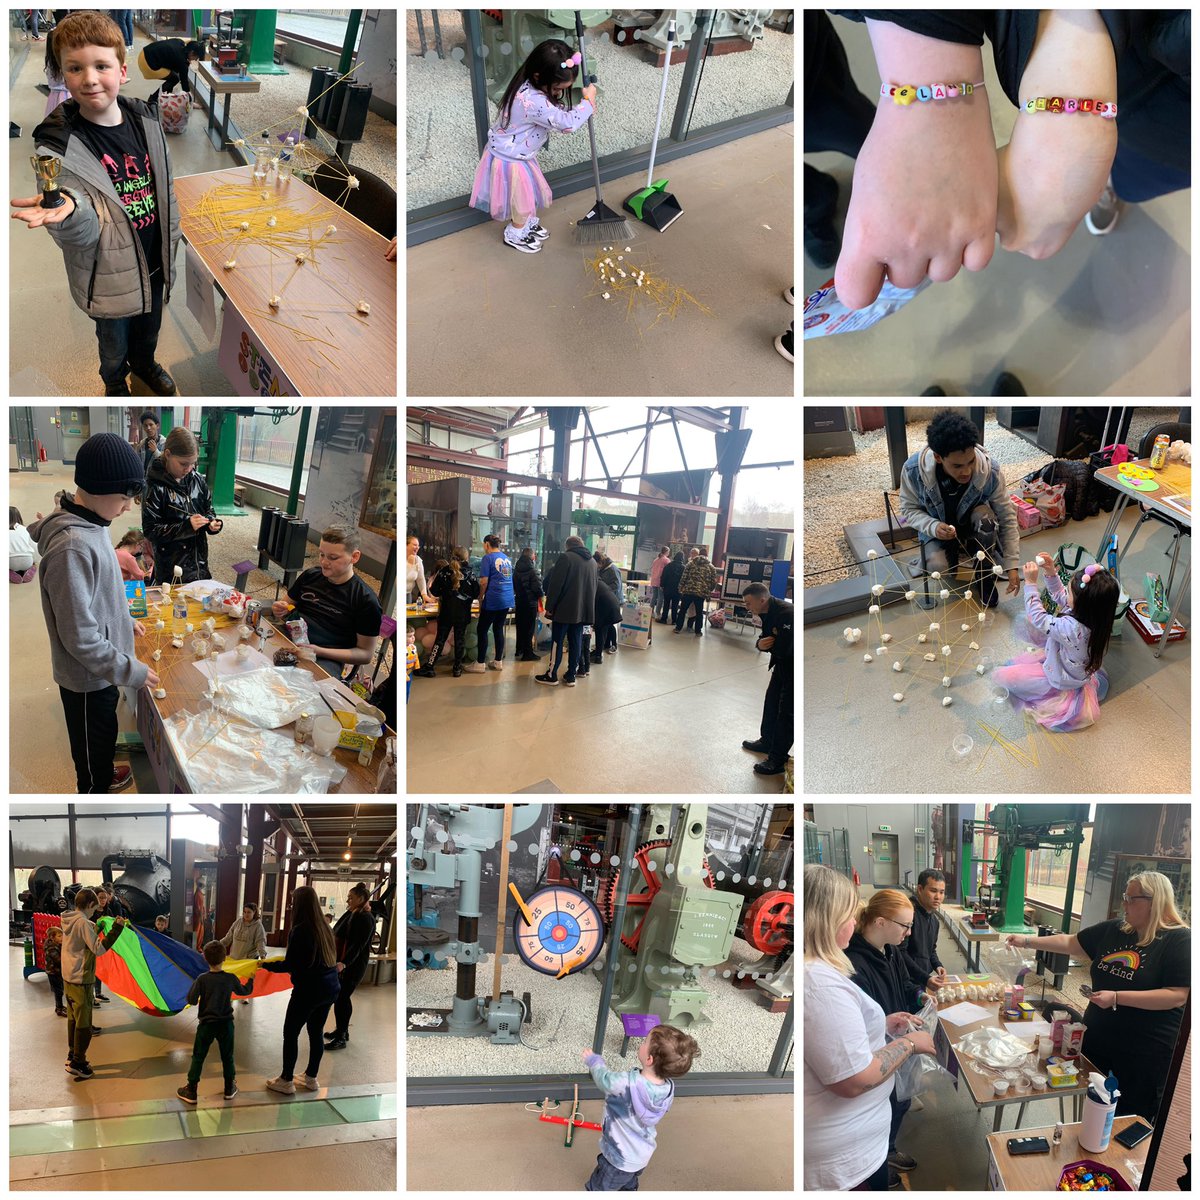 What an amazing afternoon spent with friends, family and the general public celebrating #NLCareDay23 shout out to Callum and Jamie who won 1st & 2nd place for the STEM challenge @NLCYouthwork @nlcpeople #KeepThePromise #ThisIsYouthwork